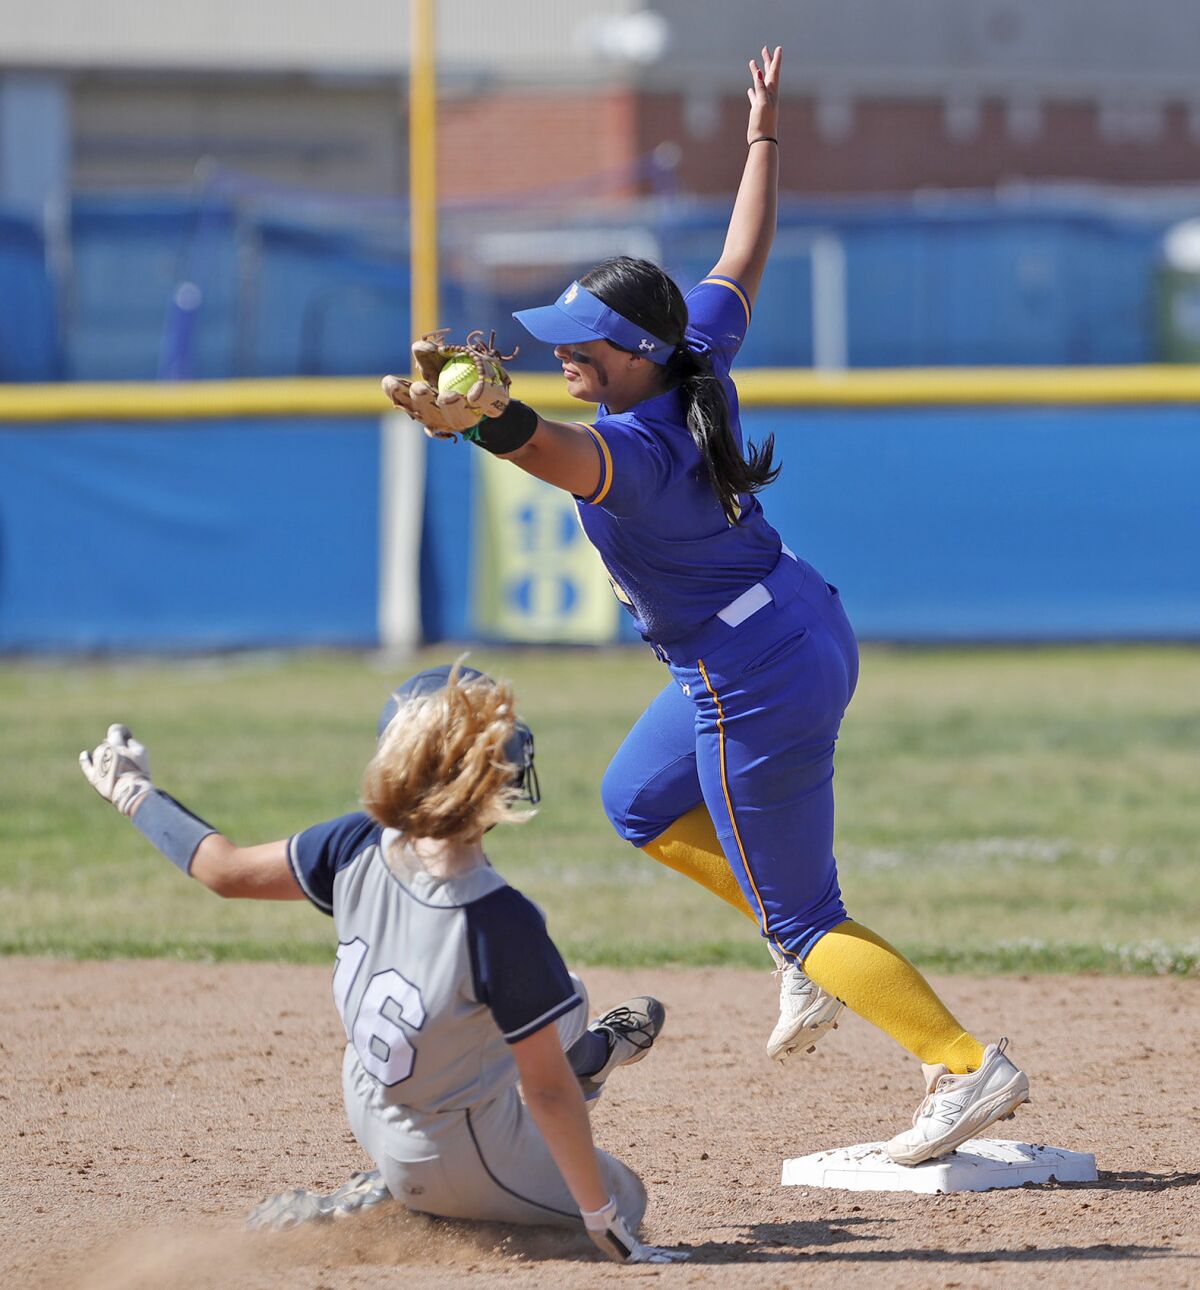 Fountain Valley's Kira Velasco snags the throw to second to force out a steal attempt by Newport Harbor's Sienna Schneider.